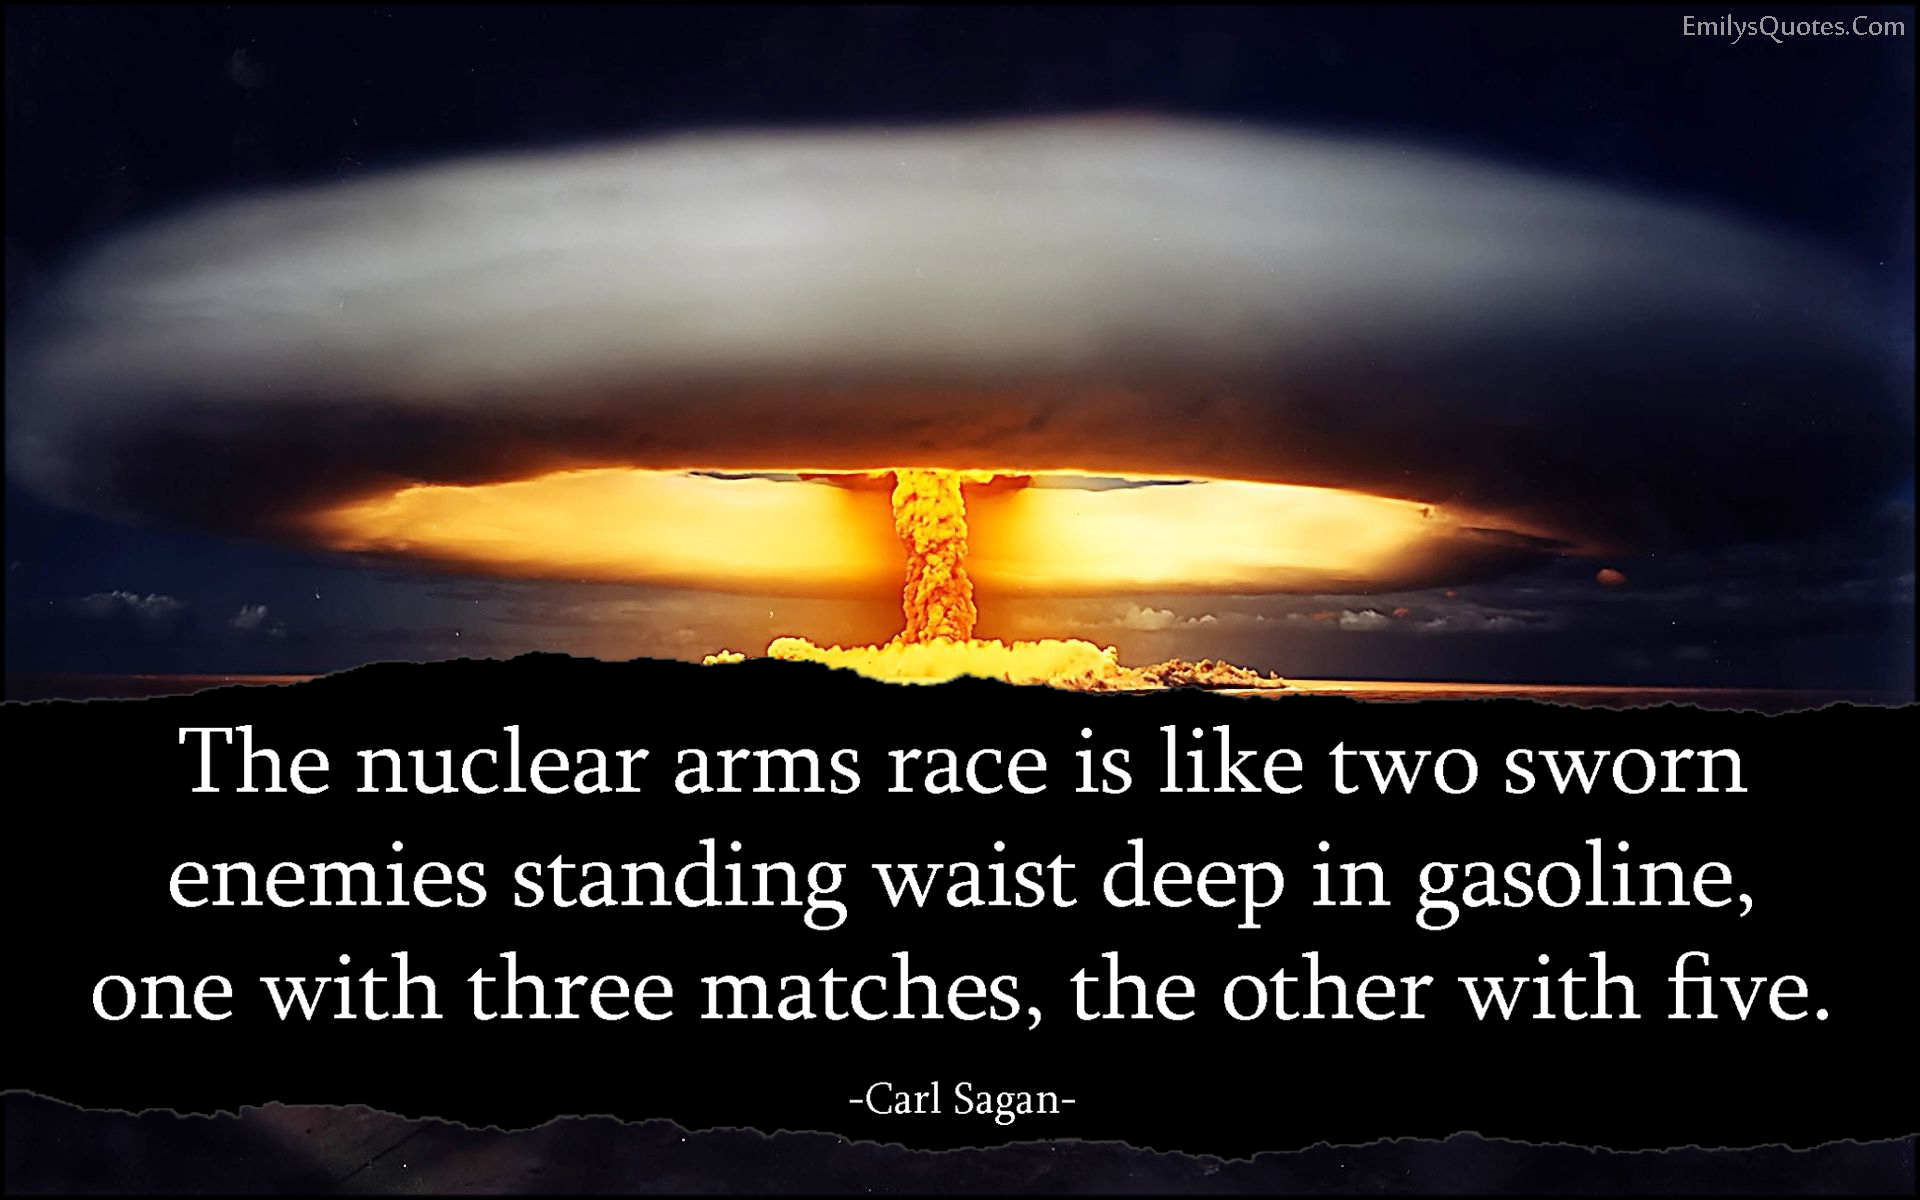 The nuclear arms race is like two sworn enemies standing waist deep in gasoline, one with three matches, the other with five